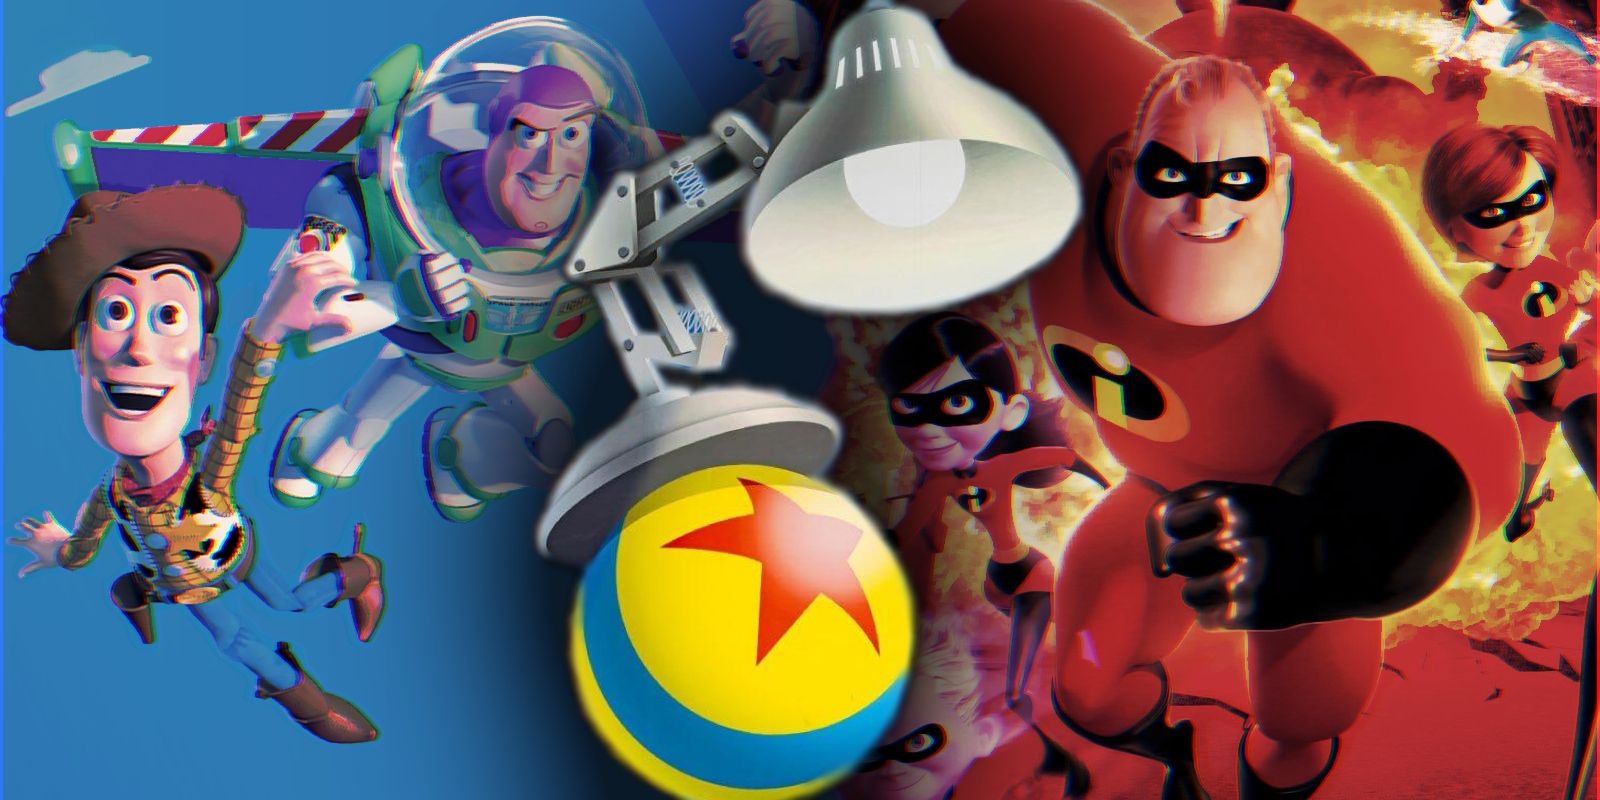 The Luxo Ball and Luxo Jr. lamp alongside Woody and Buzz and Mr. Incredible.